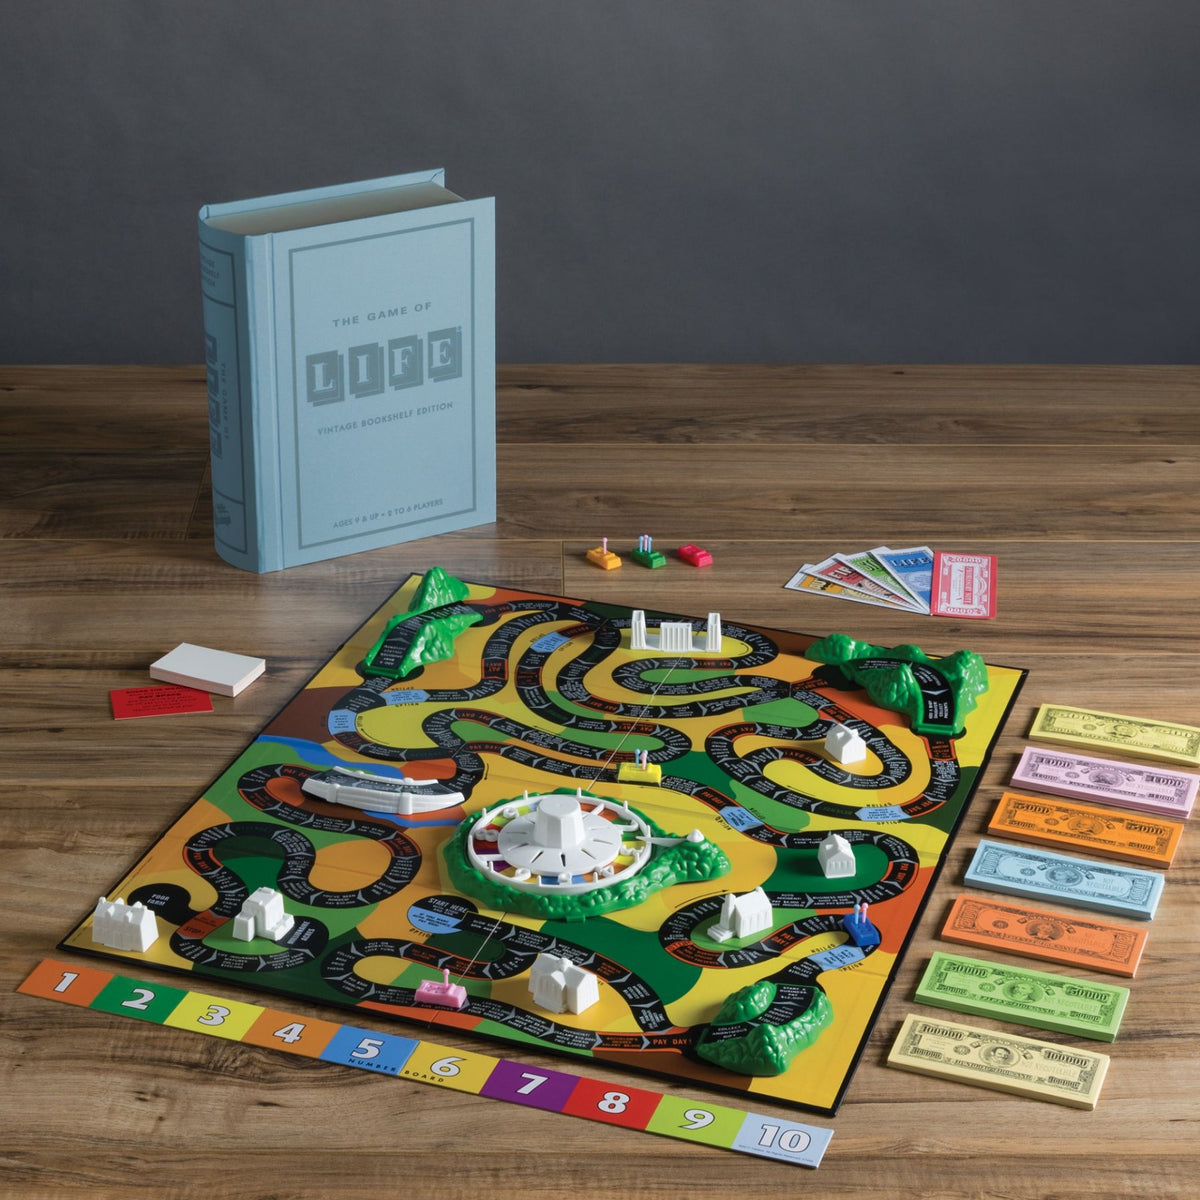 Vintage Bookshelf Edition | The Game of Life | WS Game Company